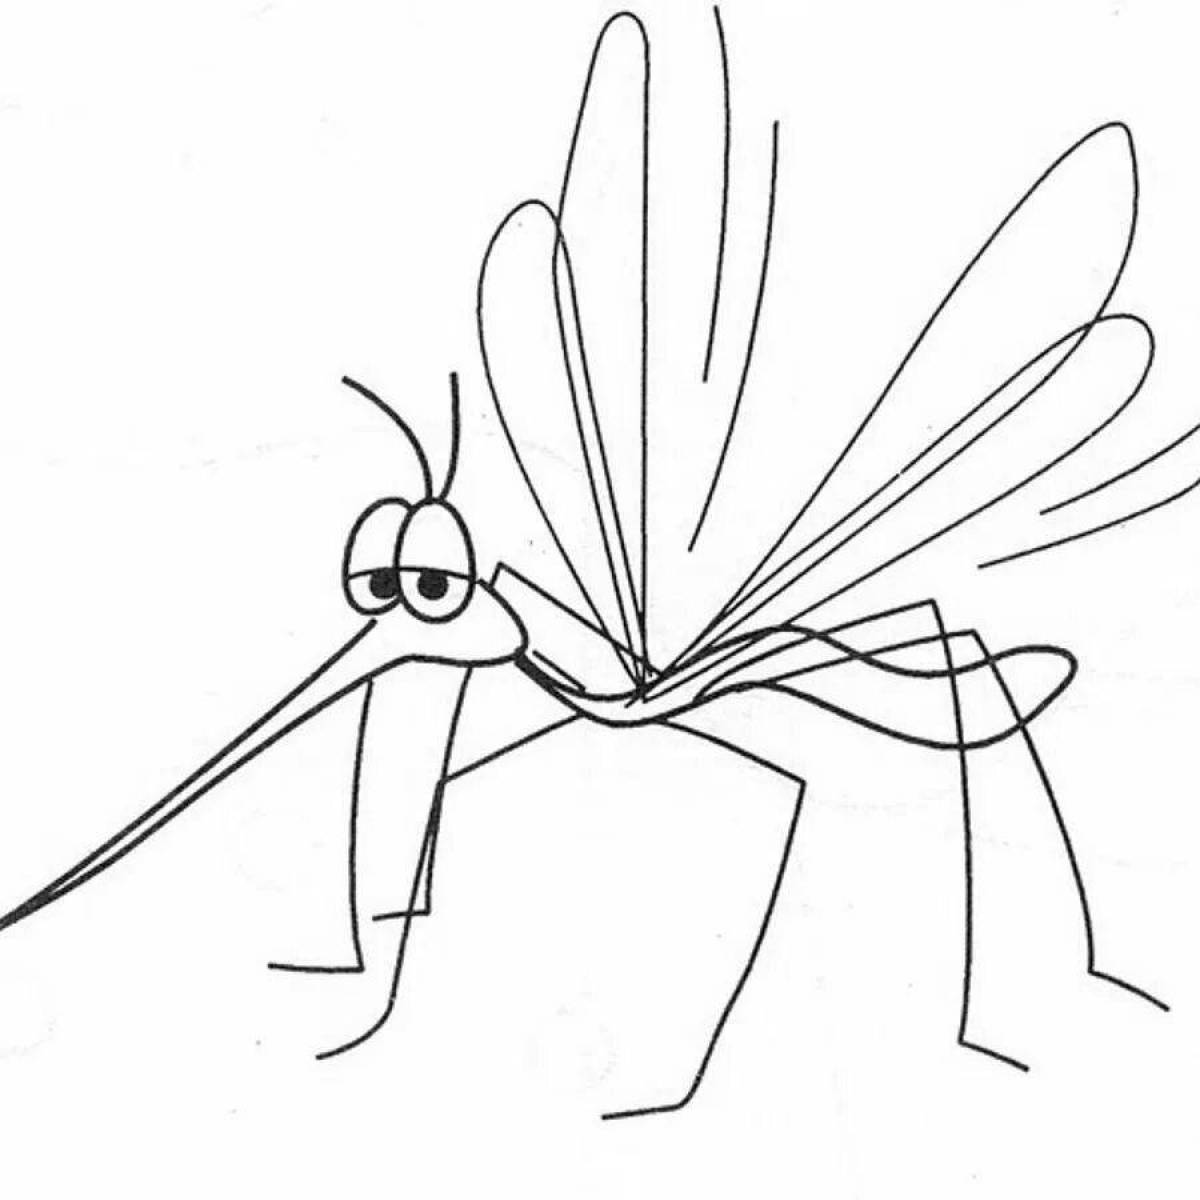 Mosquito for kids #2